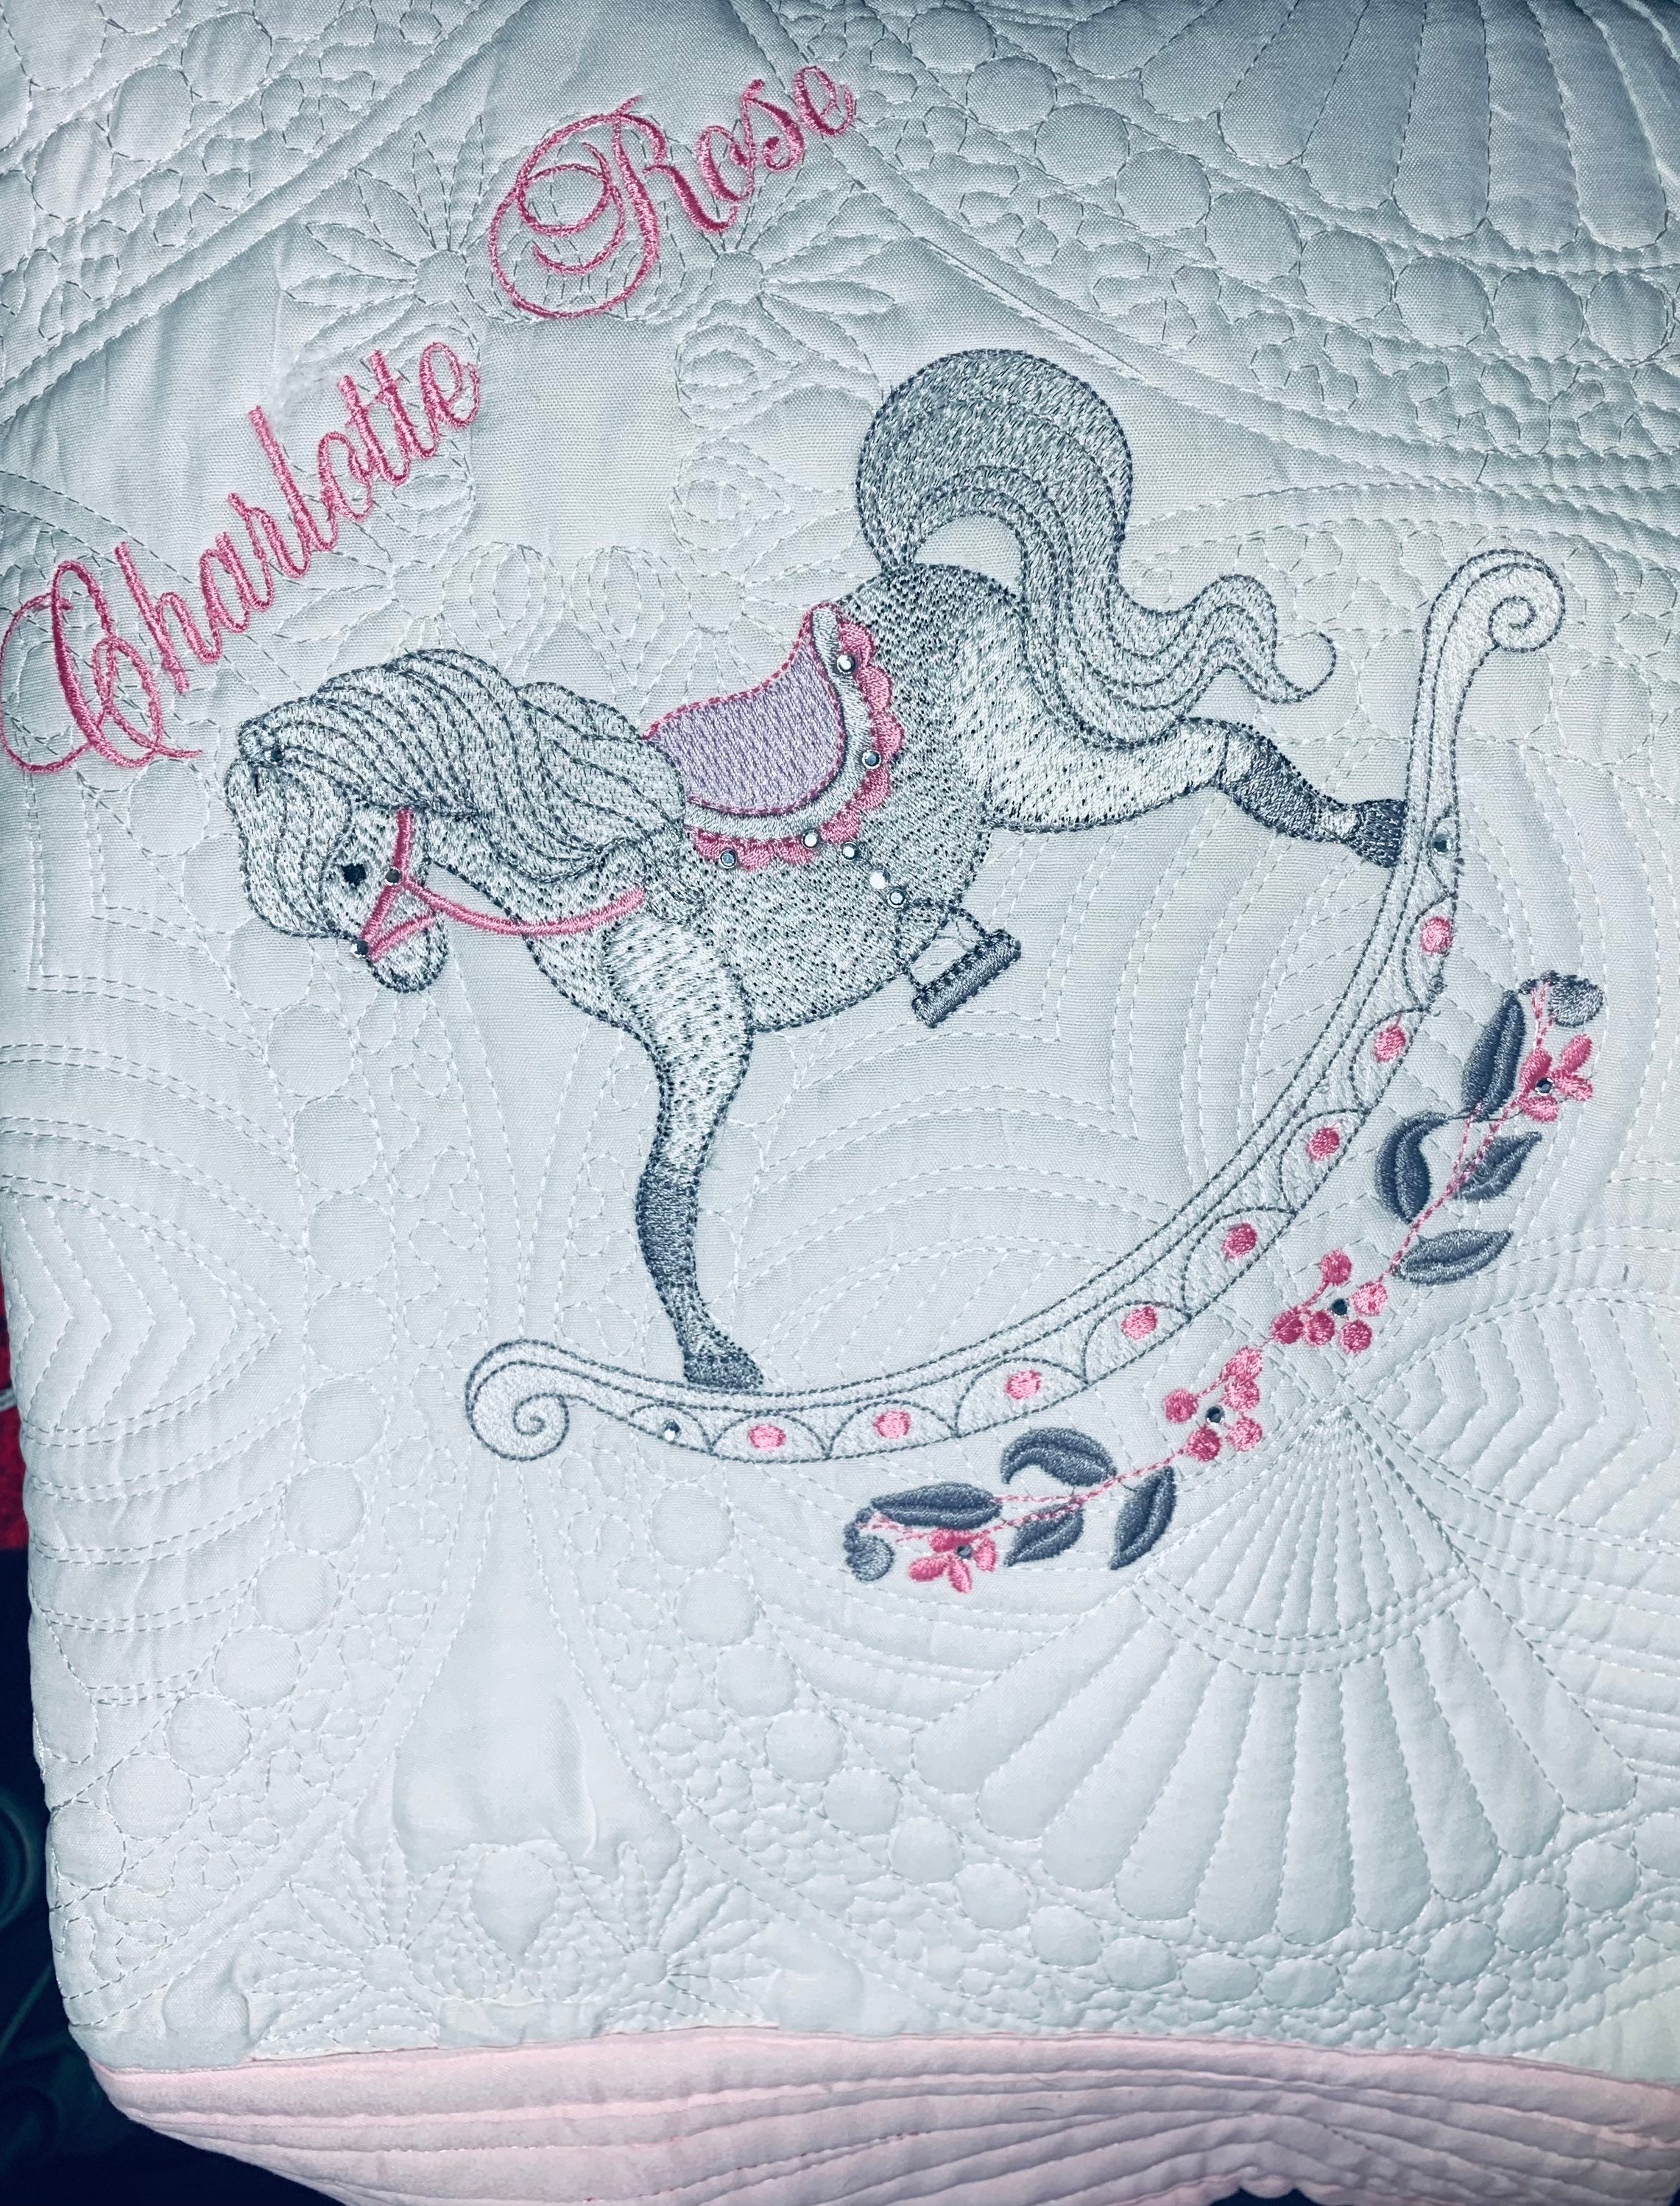 Heirloom baby quilt  for girls or boys, makes a treasured gift, Rocking Horse Baby blanket monogrammed or personalized for boys or girls